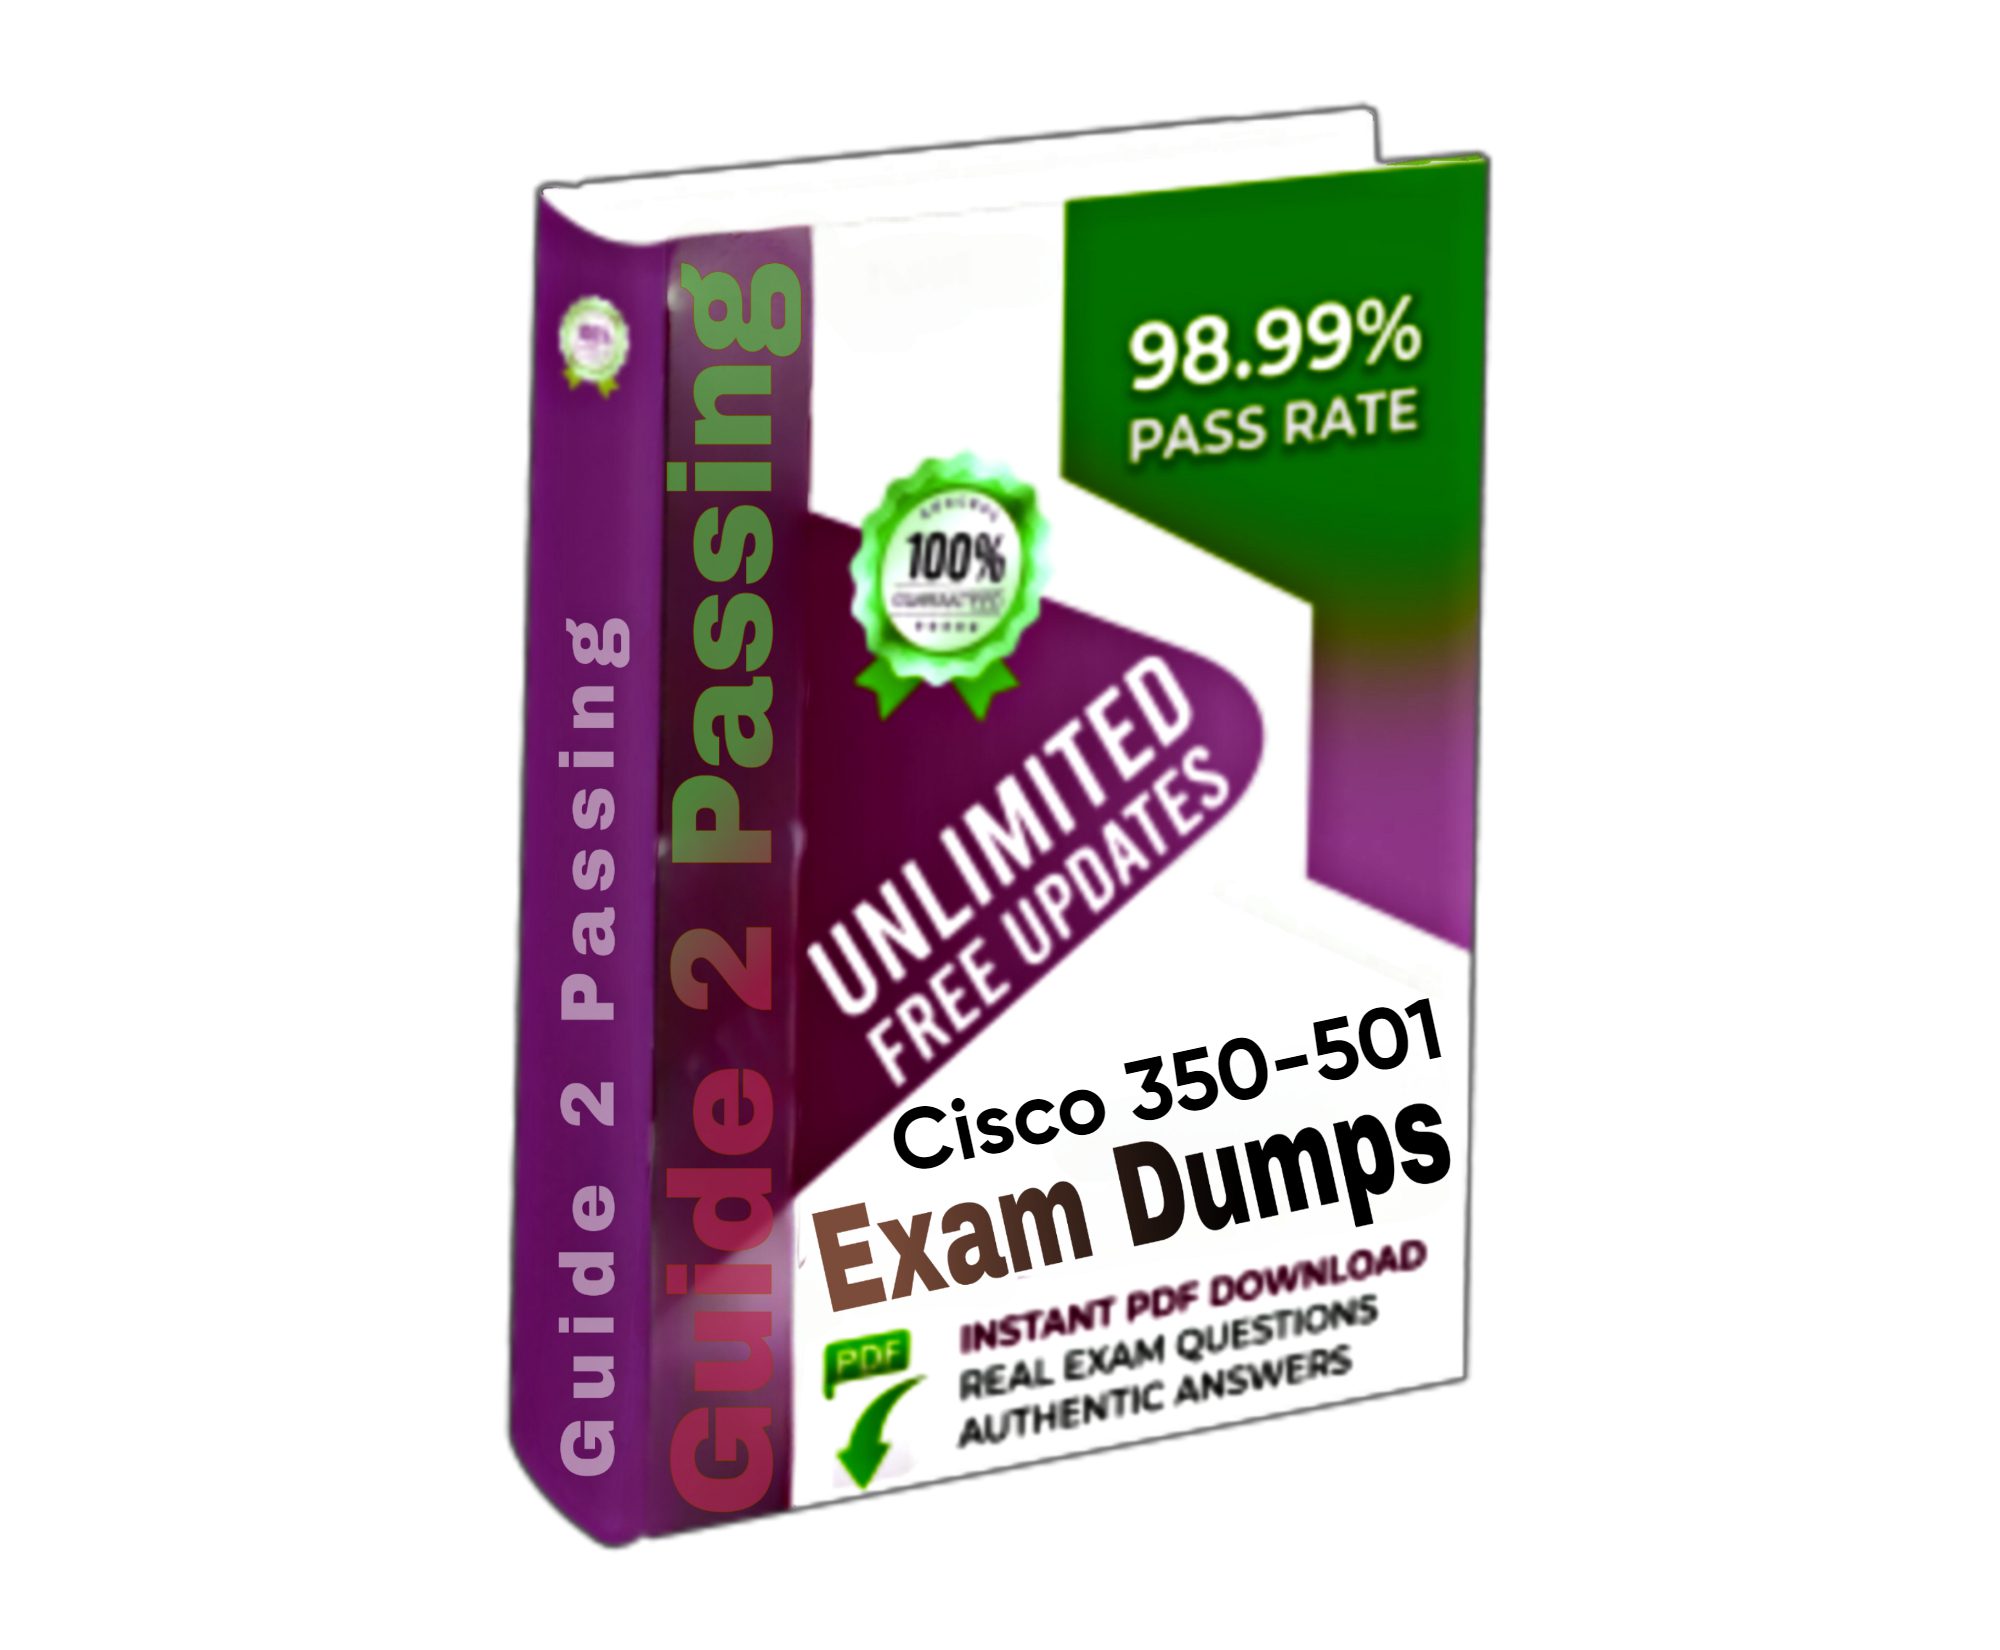 Pass Your Cisco 350-501 Exam Dumps From Guide 2 Passing